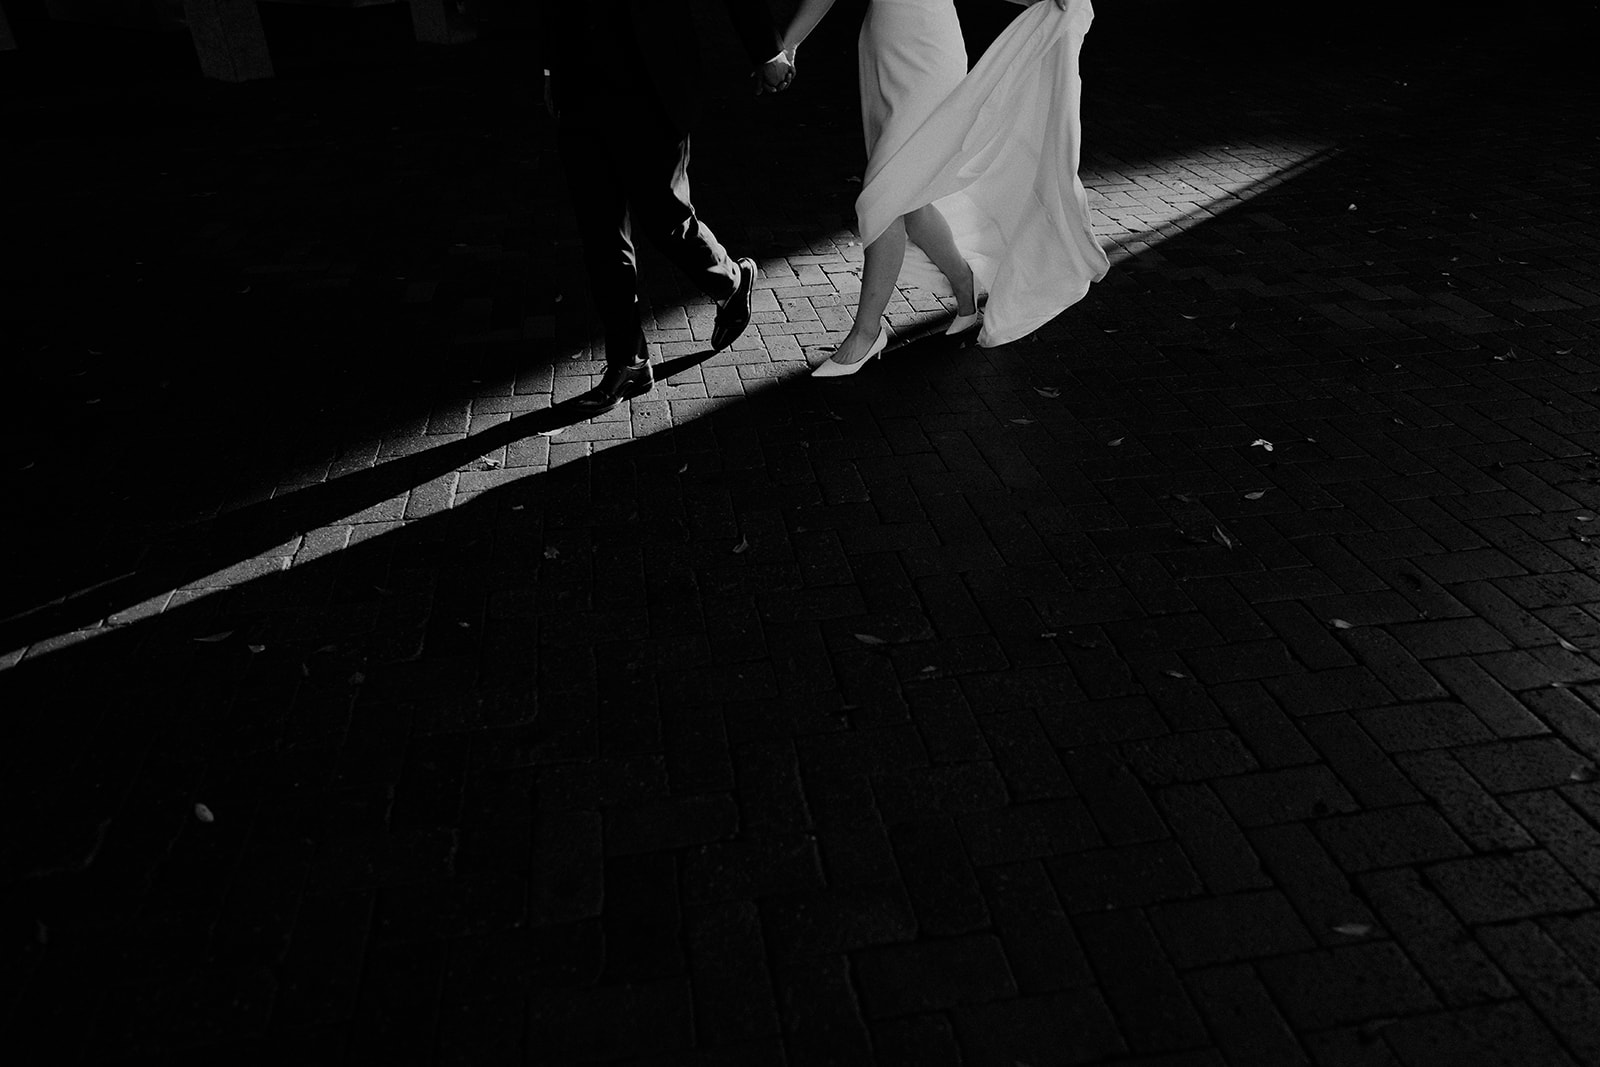 A black-and-white image of the bride and groom, walking away, showing only their feet in a very artistic manner